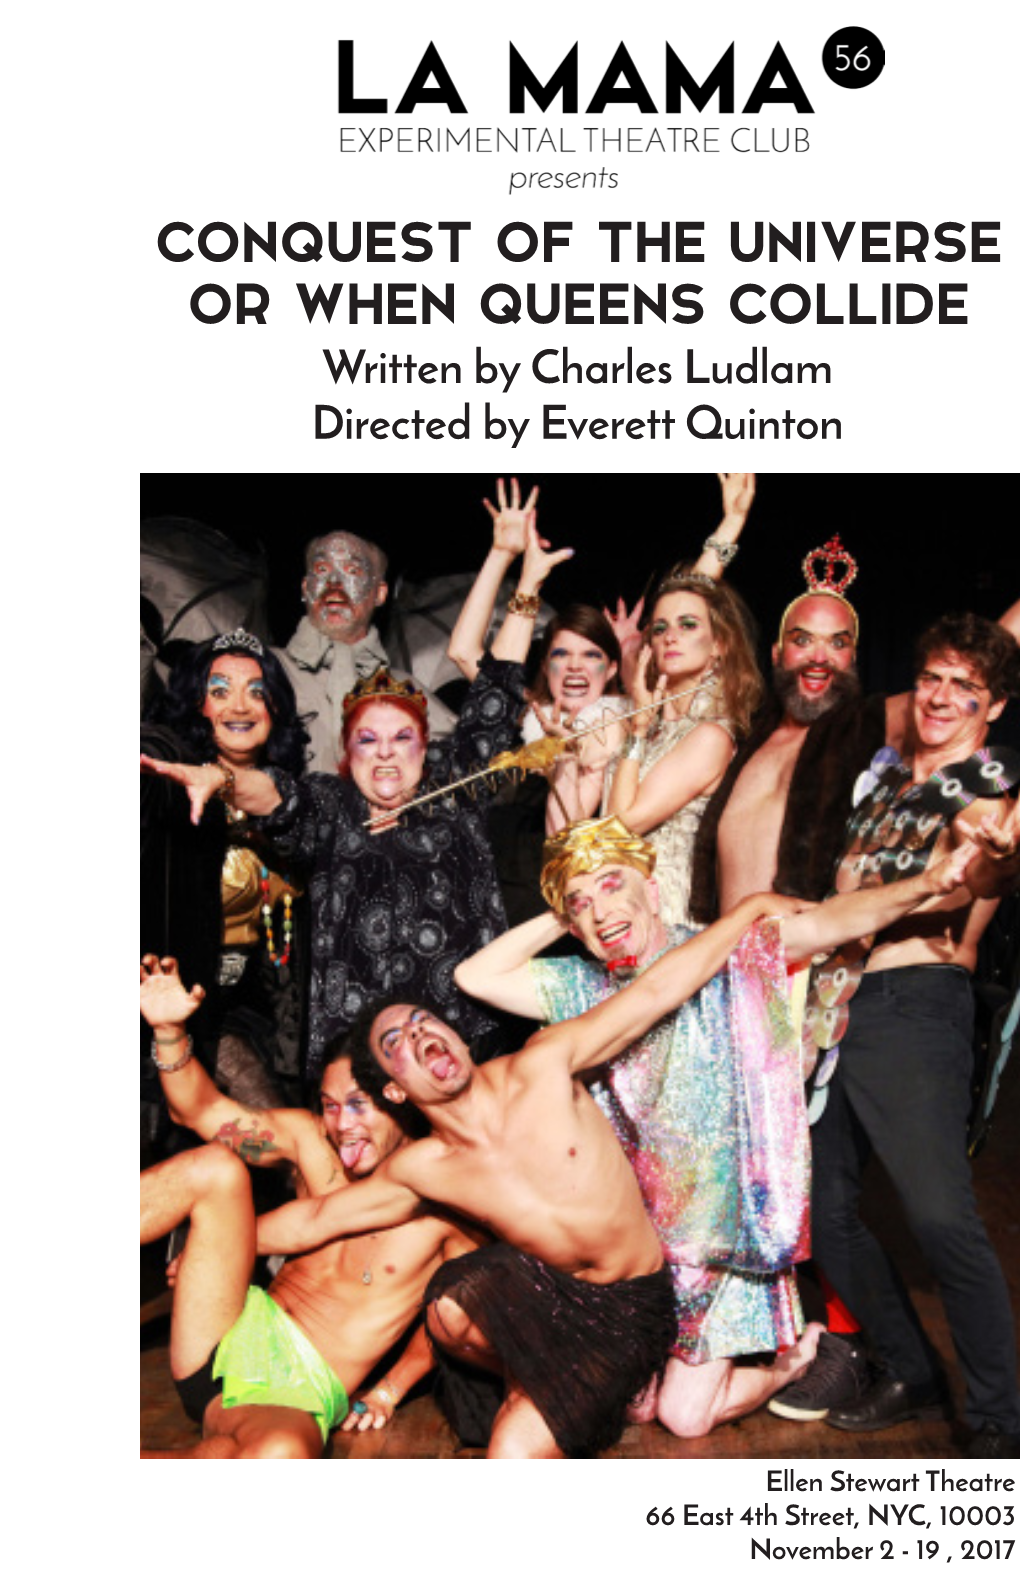 CONQUEST of the UNIVERSE OR WHEN QUEENS COLLIDE Written by Charles Ludlam Directed by Everett Quinton